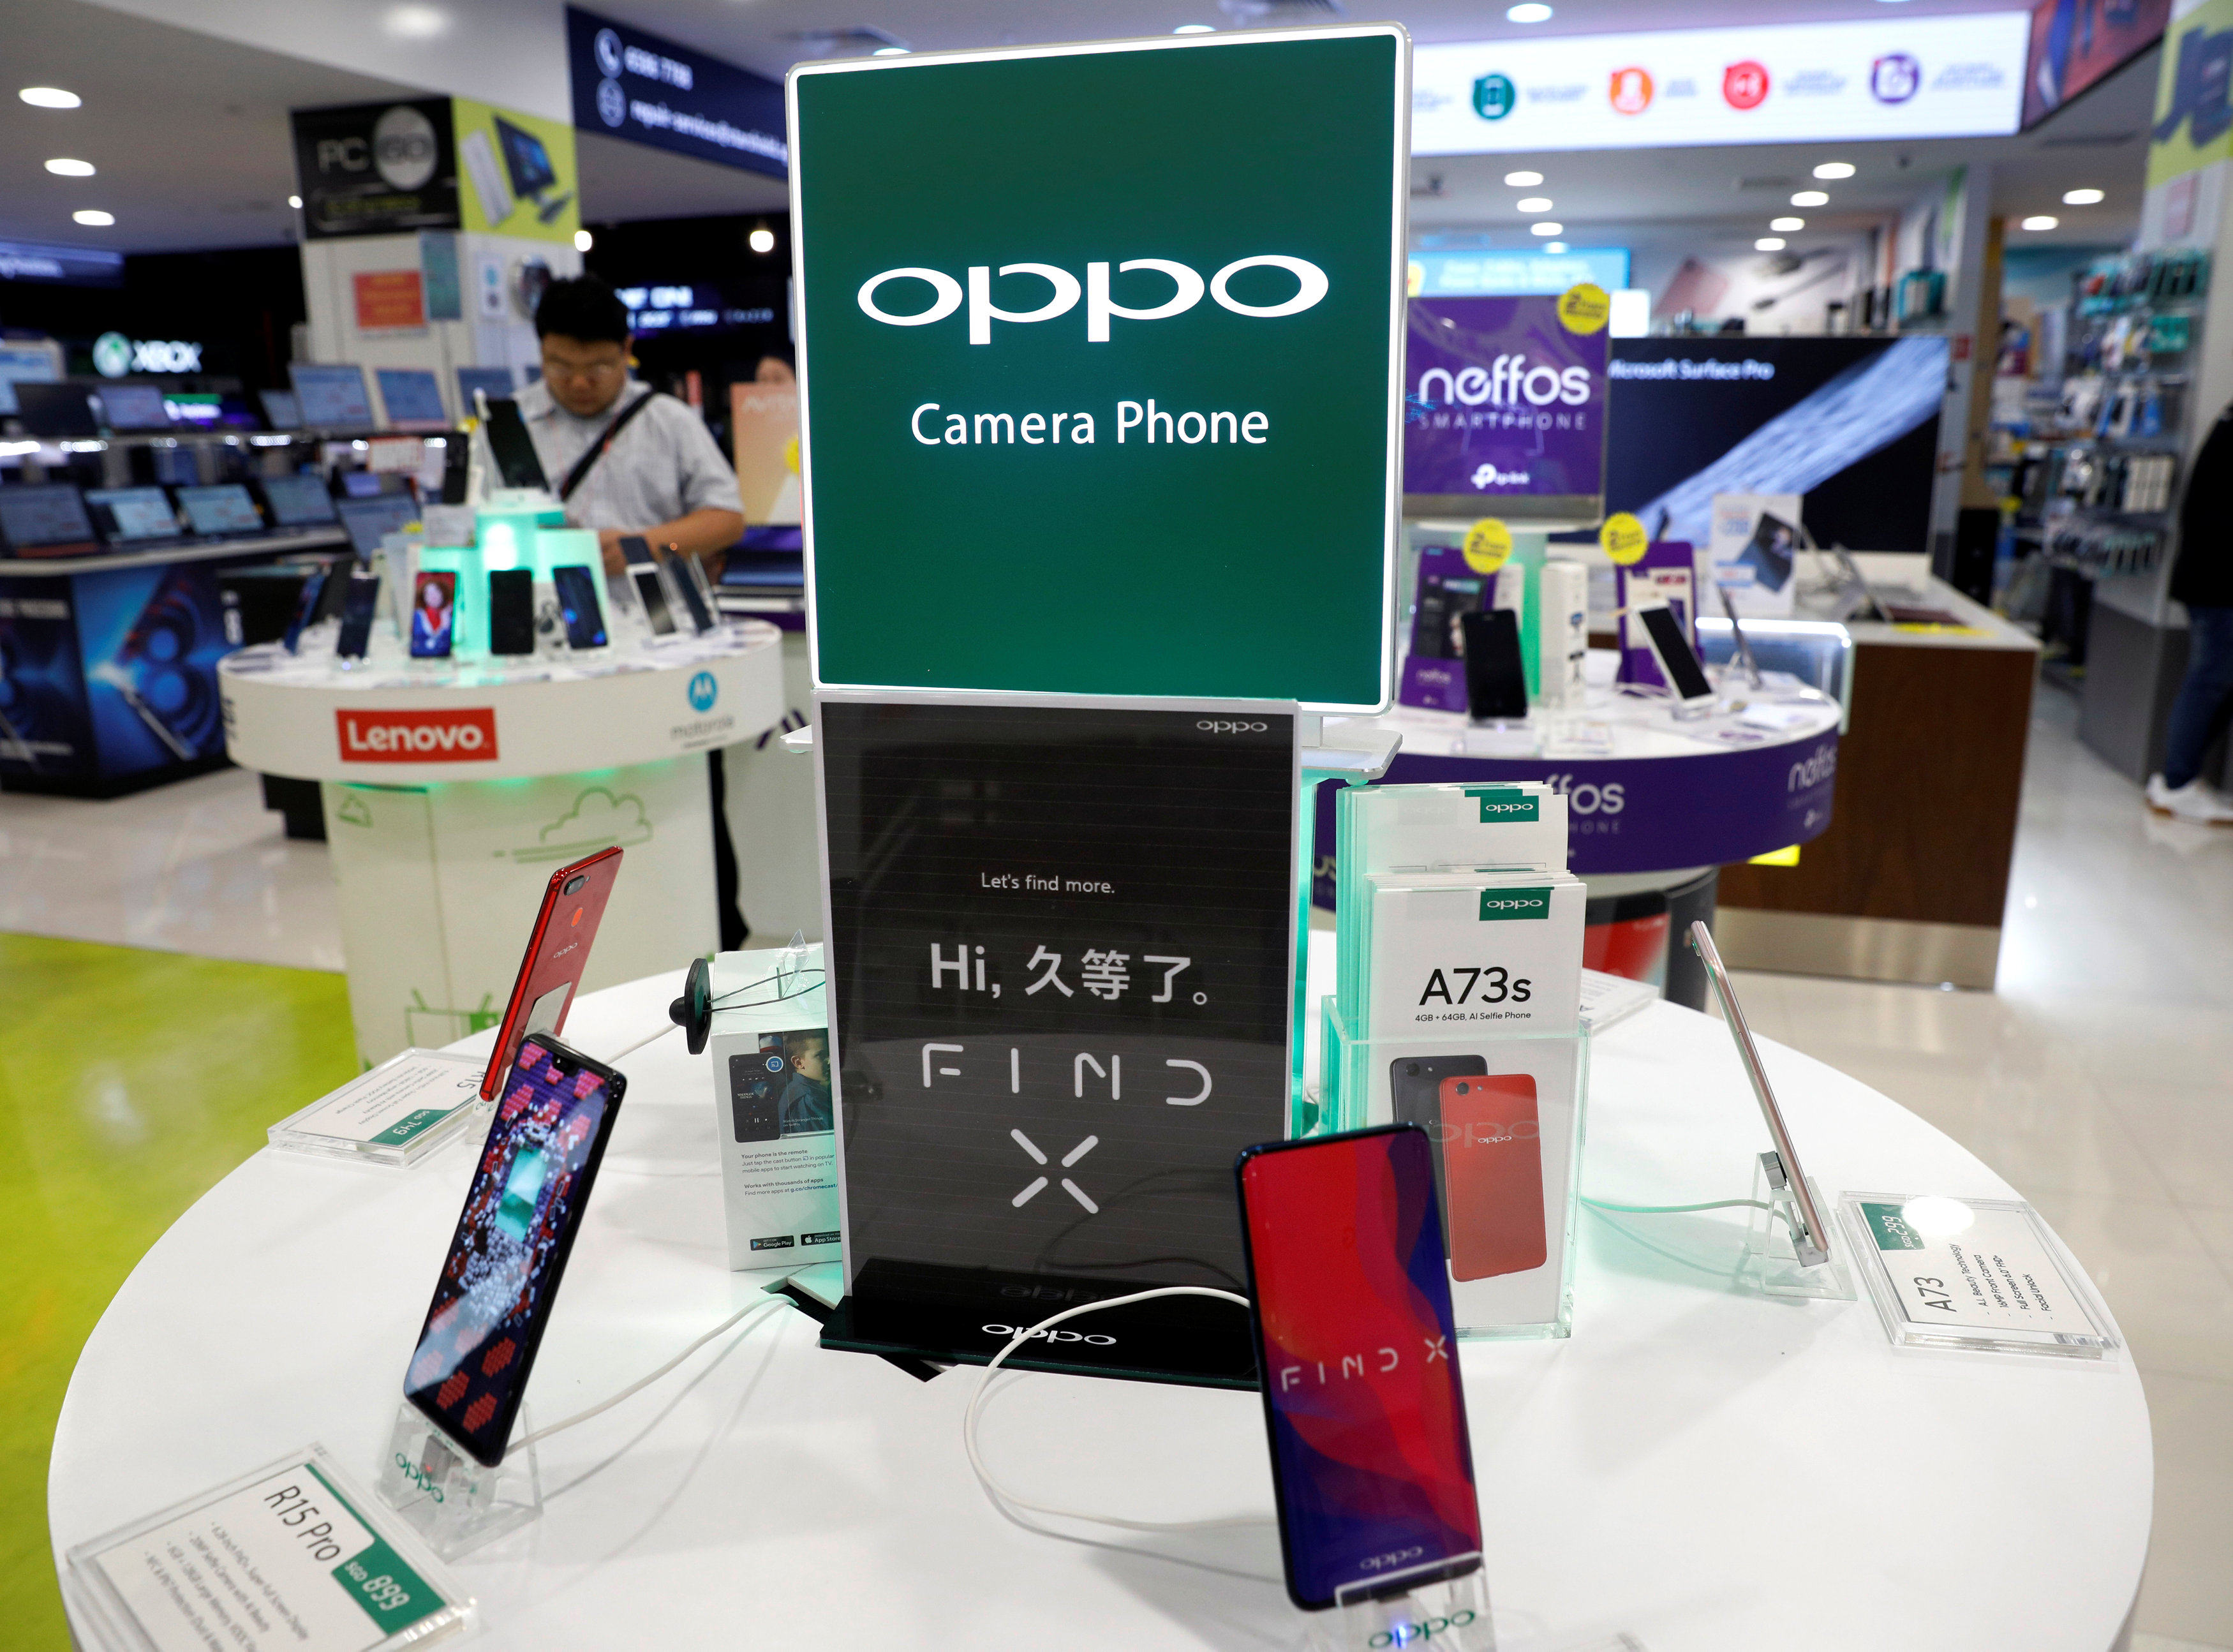 Oppo smartphones displayed in a shop in Singapore on August 8, 2018. Photo: Reuters